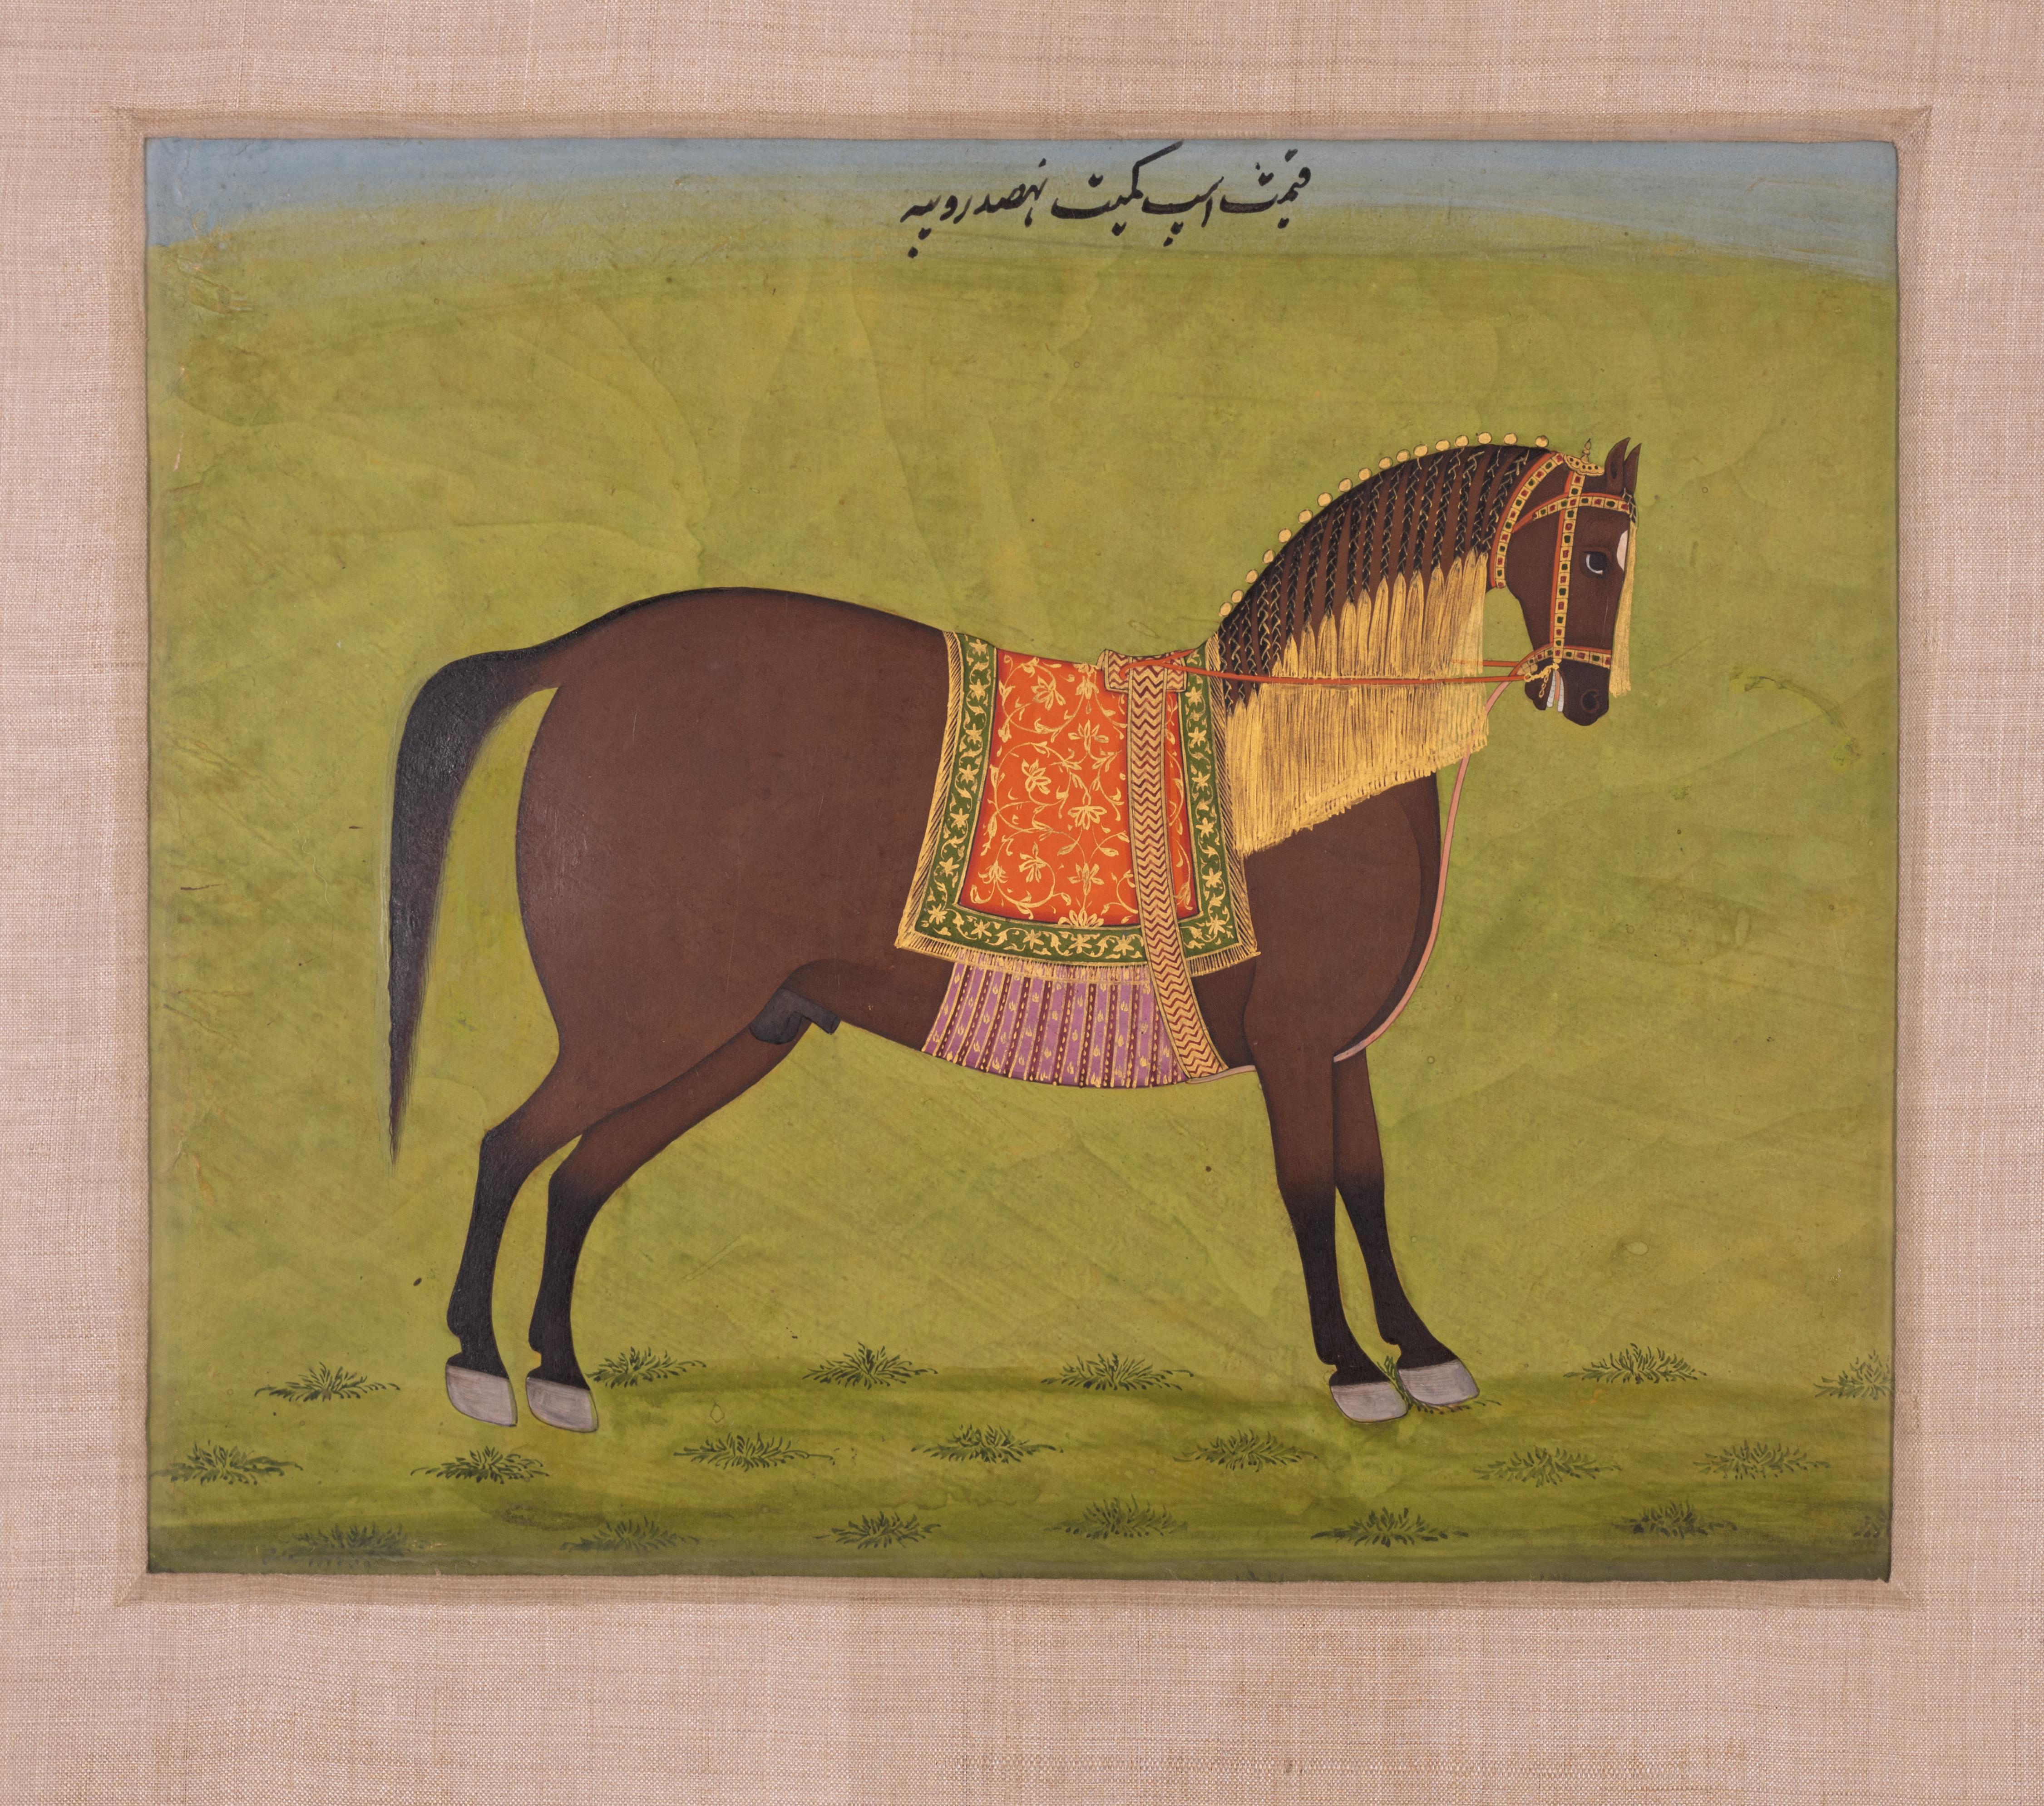 A painting of a caparisoned horse in mineral pigments (gouache) saddled and in rein painted with gold highlights circa early 19th century from Rajasthan, possibly Mewar or Jaipur.

In old India, prized royal horses and elephants were highly valued